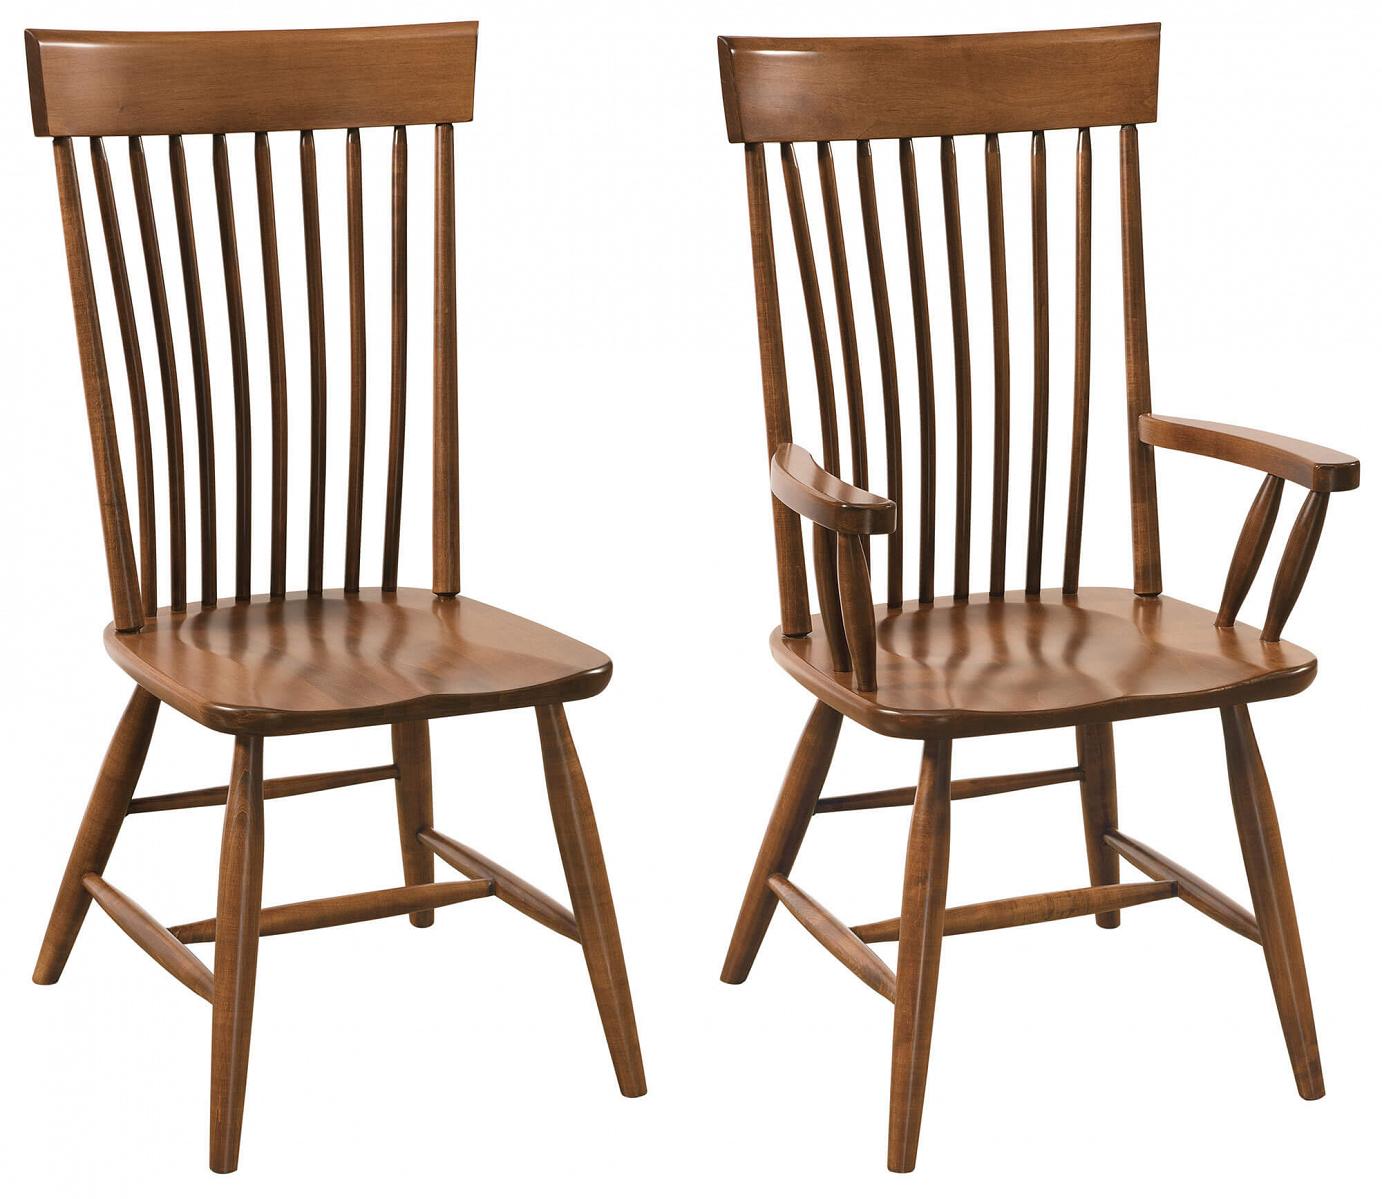 RH Yoder Albany Chairs